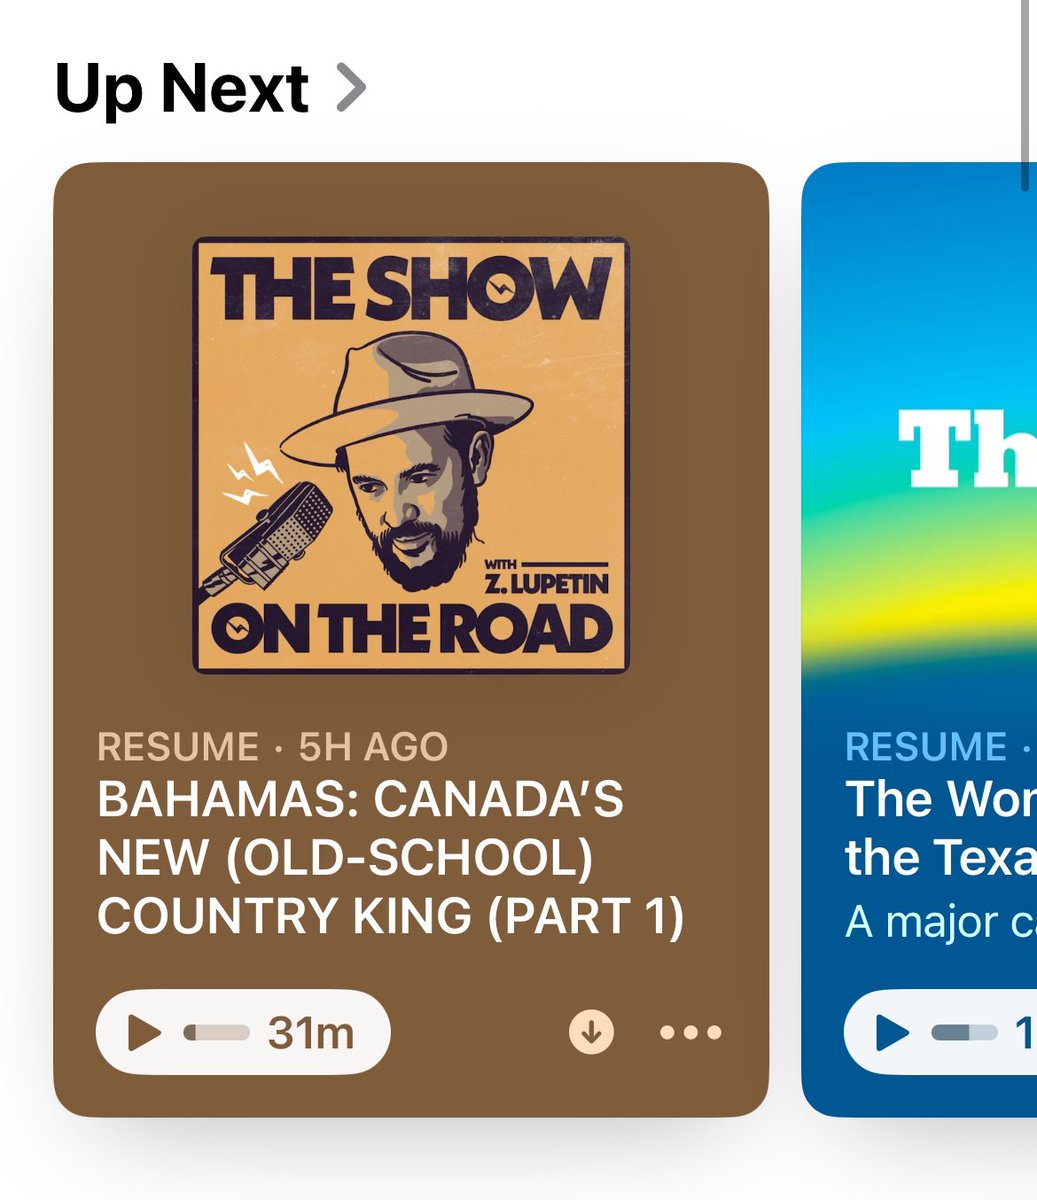 Sure you could tune into the scary news stuff on your podcast page - or listen to Z’s The Show On The Road pod - this week he’s back with Canadian master songwriter and guitar ace @BahamasMusic to dive into his newest Bootcut! It’s a hoot: theshowontheroad.com/episodes 🇨🇦 @osirispod